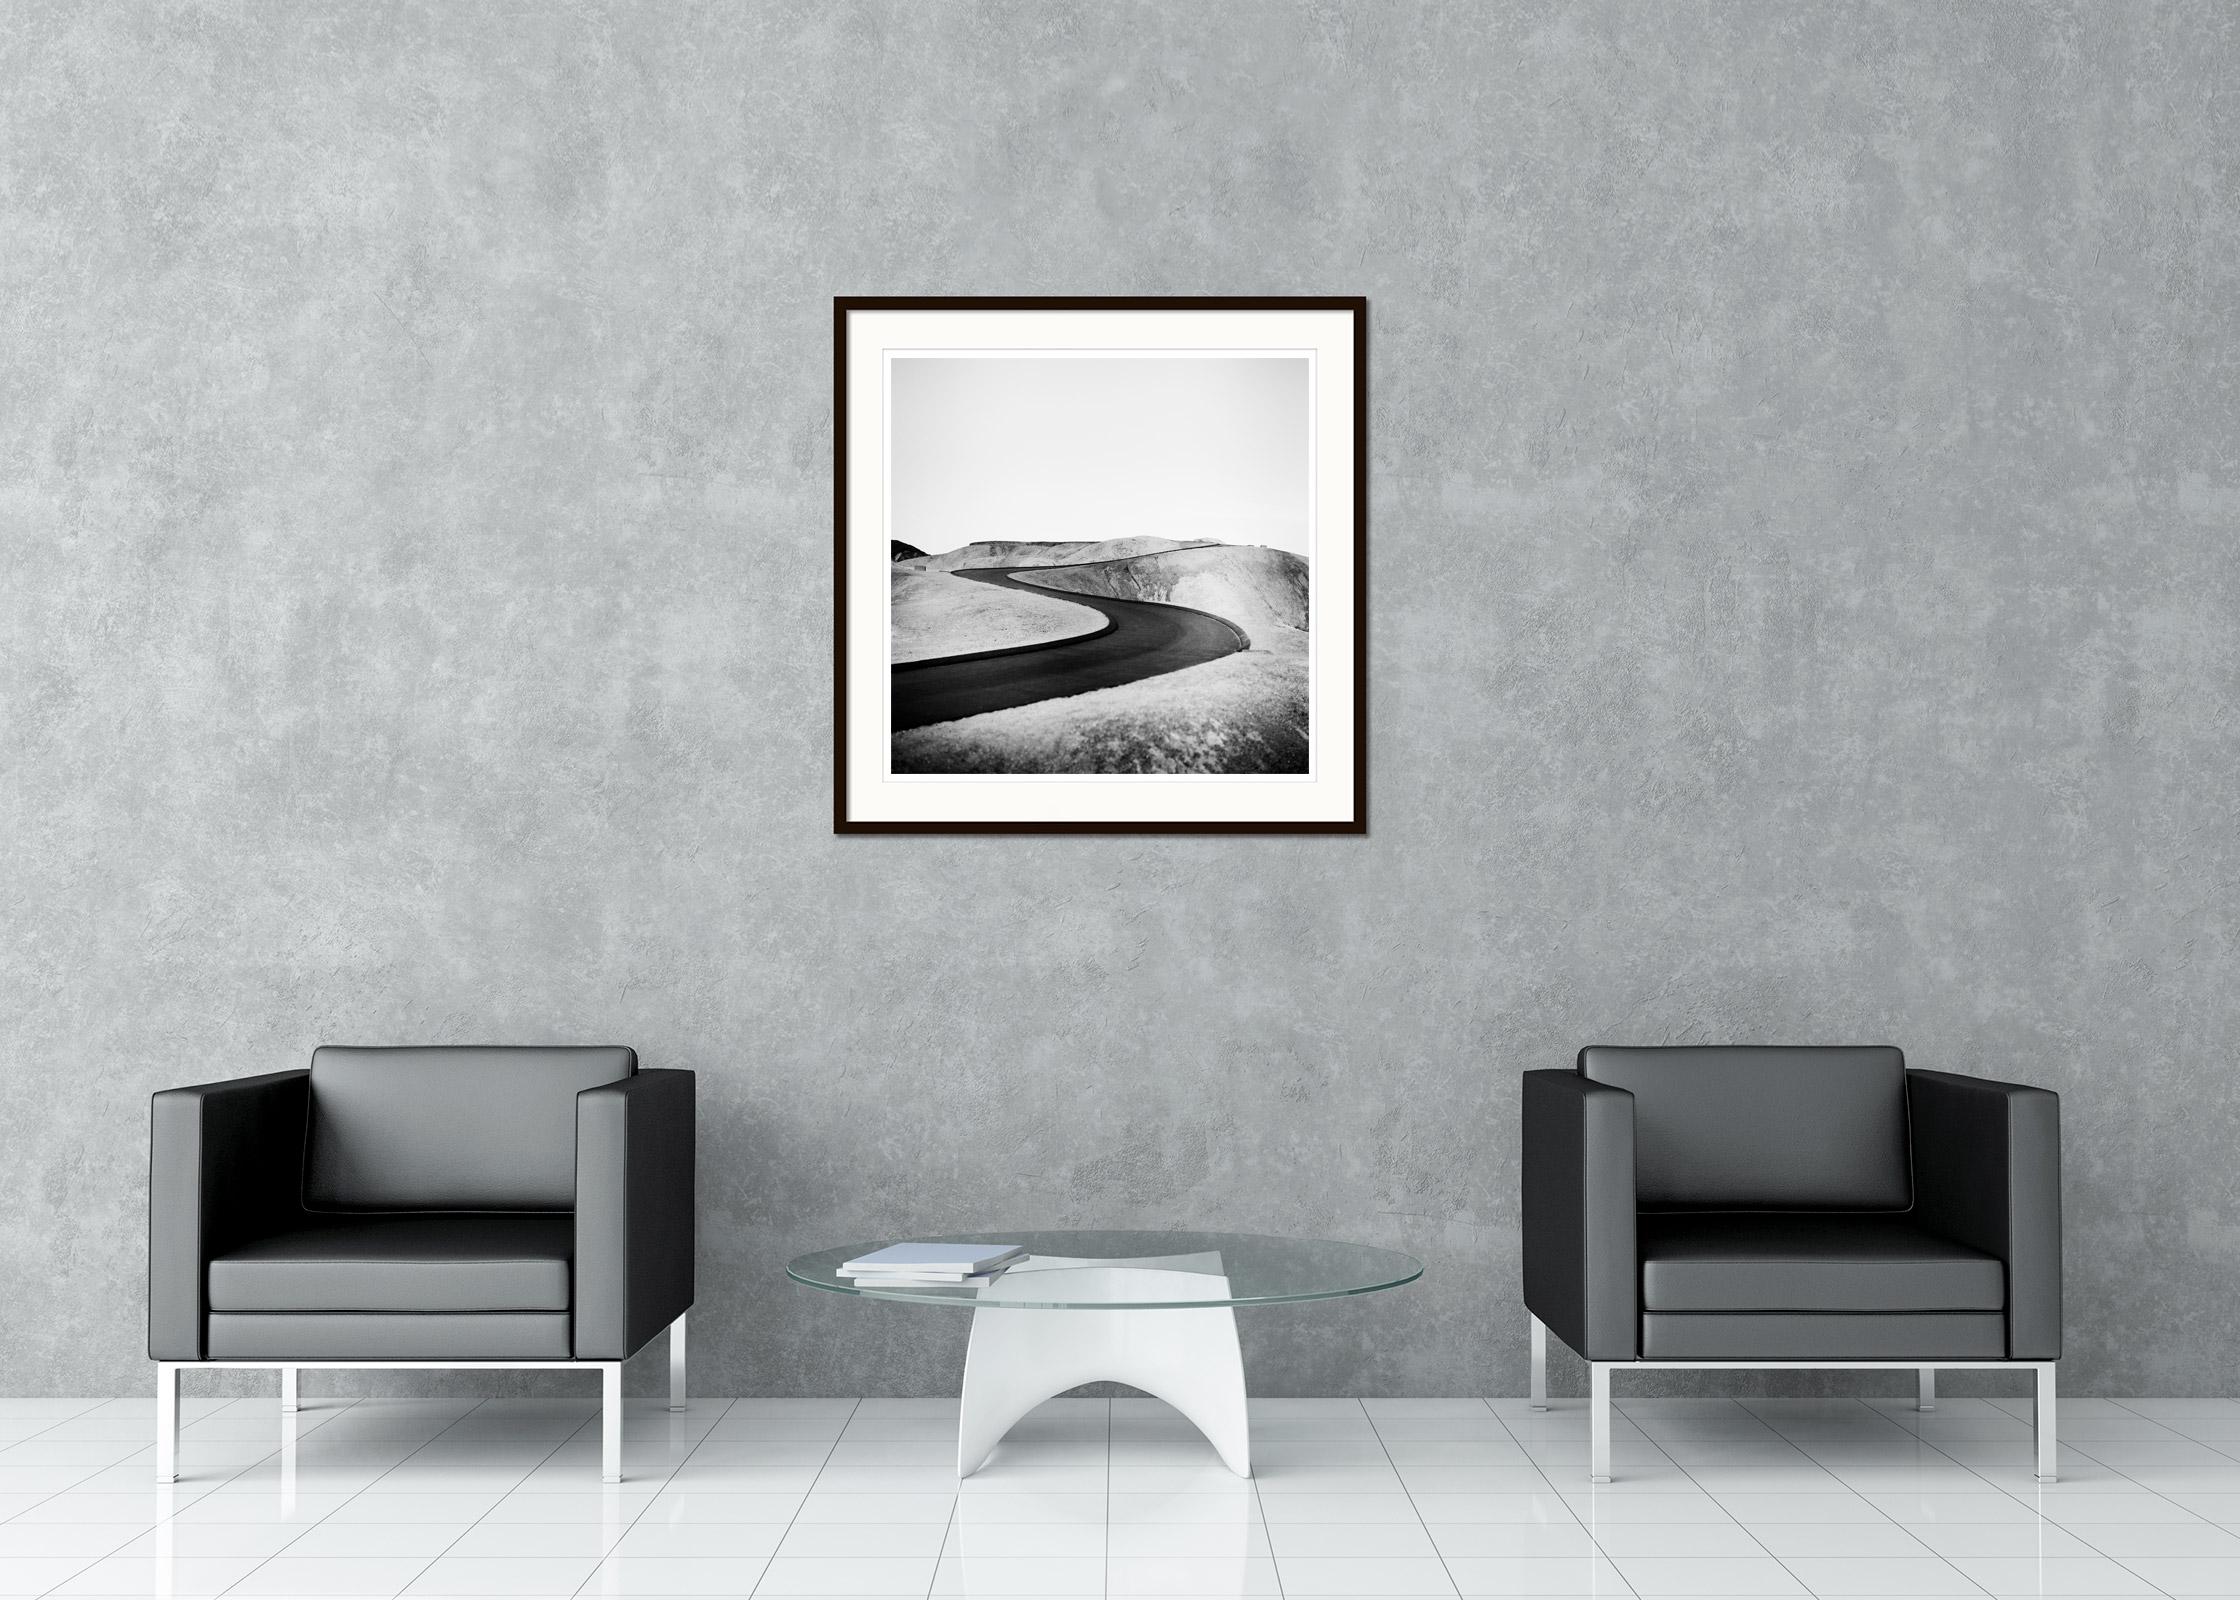 Black and white fine art landscape photography. S curved road on the way to the Death Valley, California, USA. Archival pigment ink print, edition of 9. Signed, titled, dated and numbered by artist. Certificate of authenticity included. Printed with